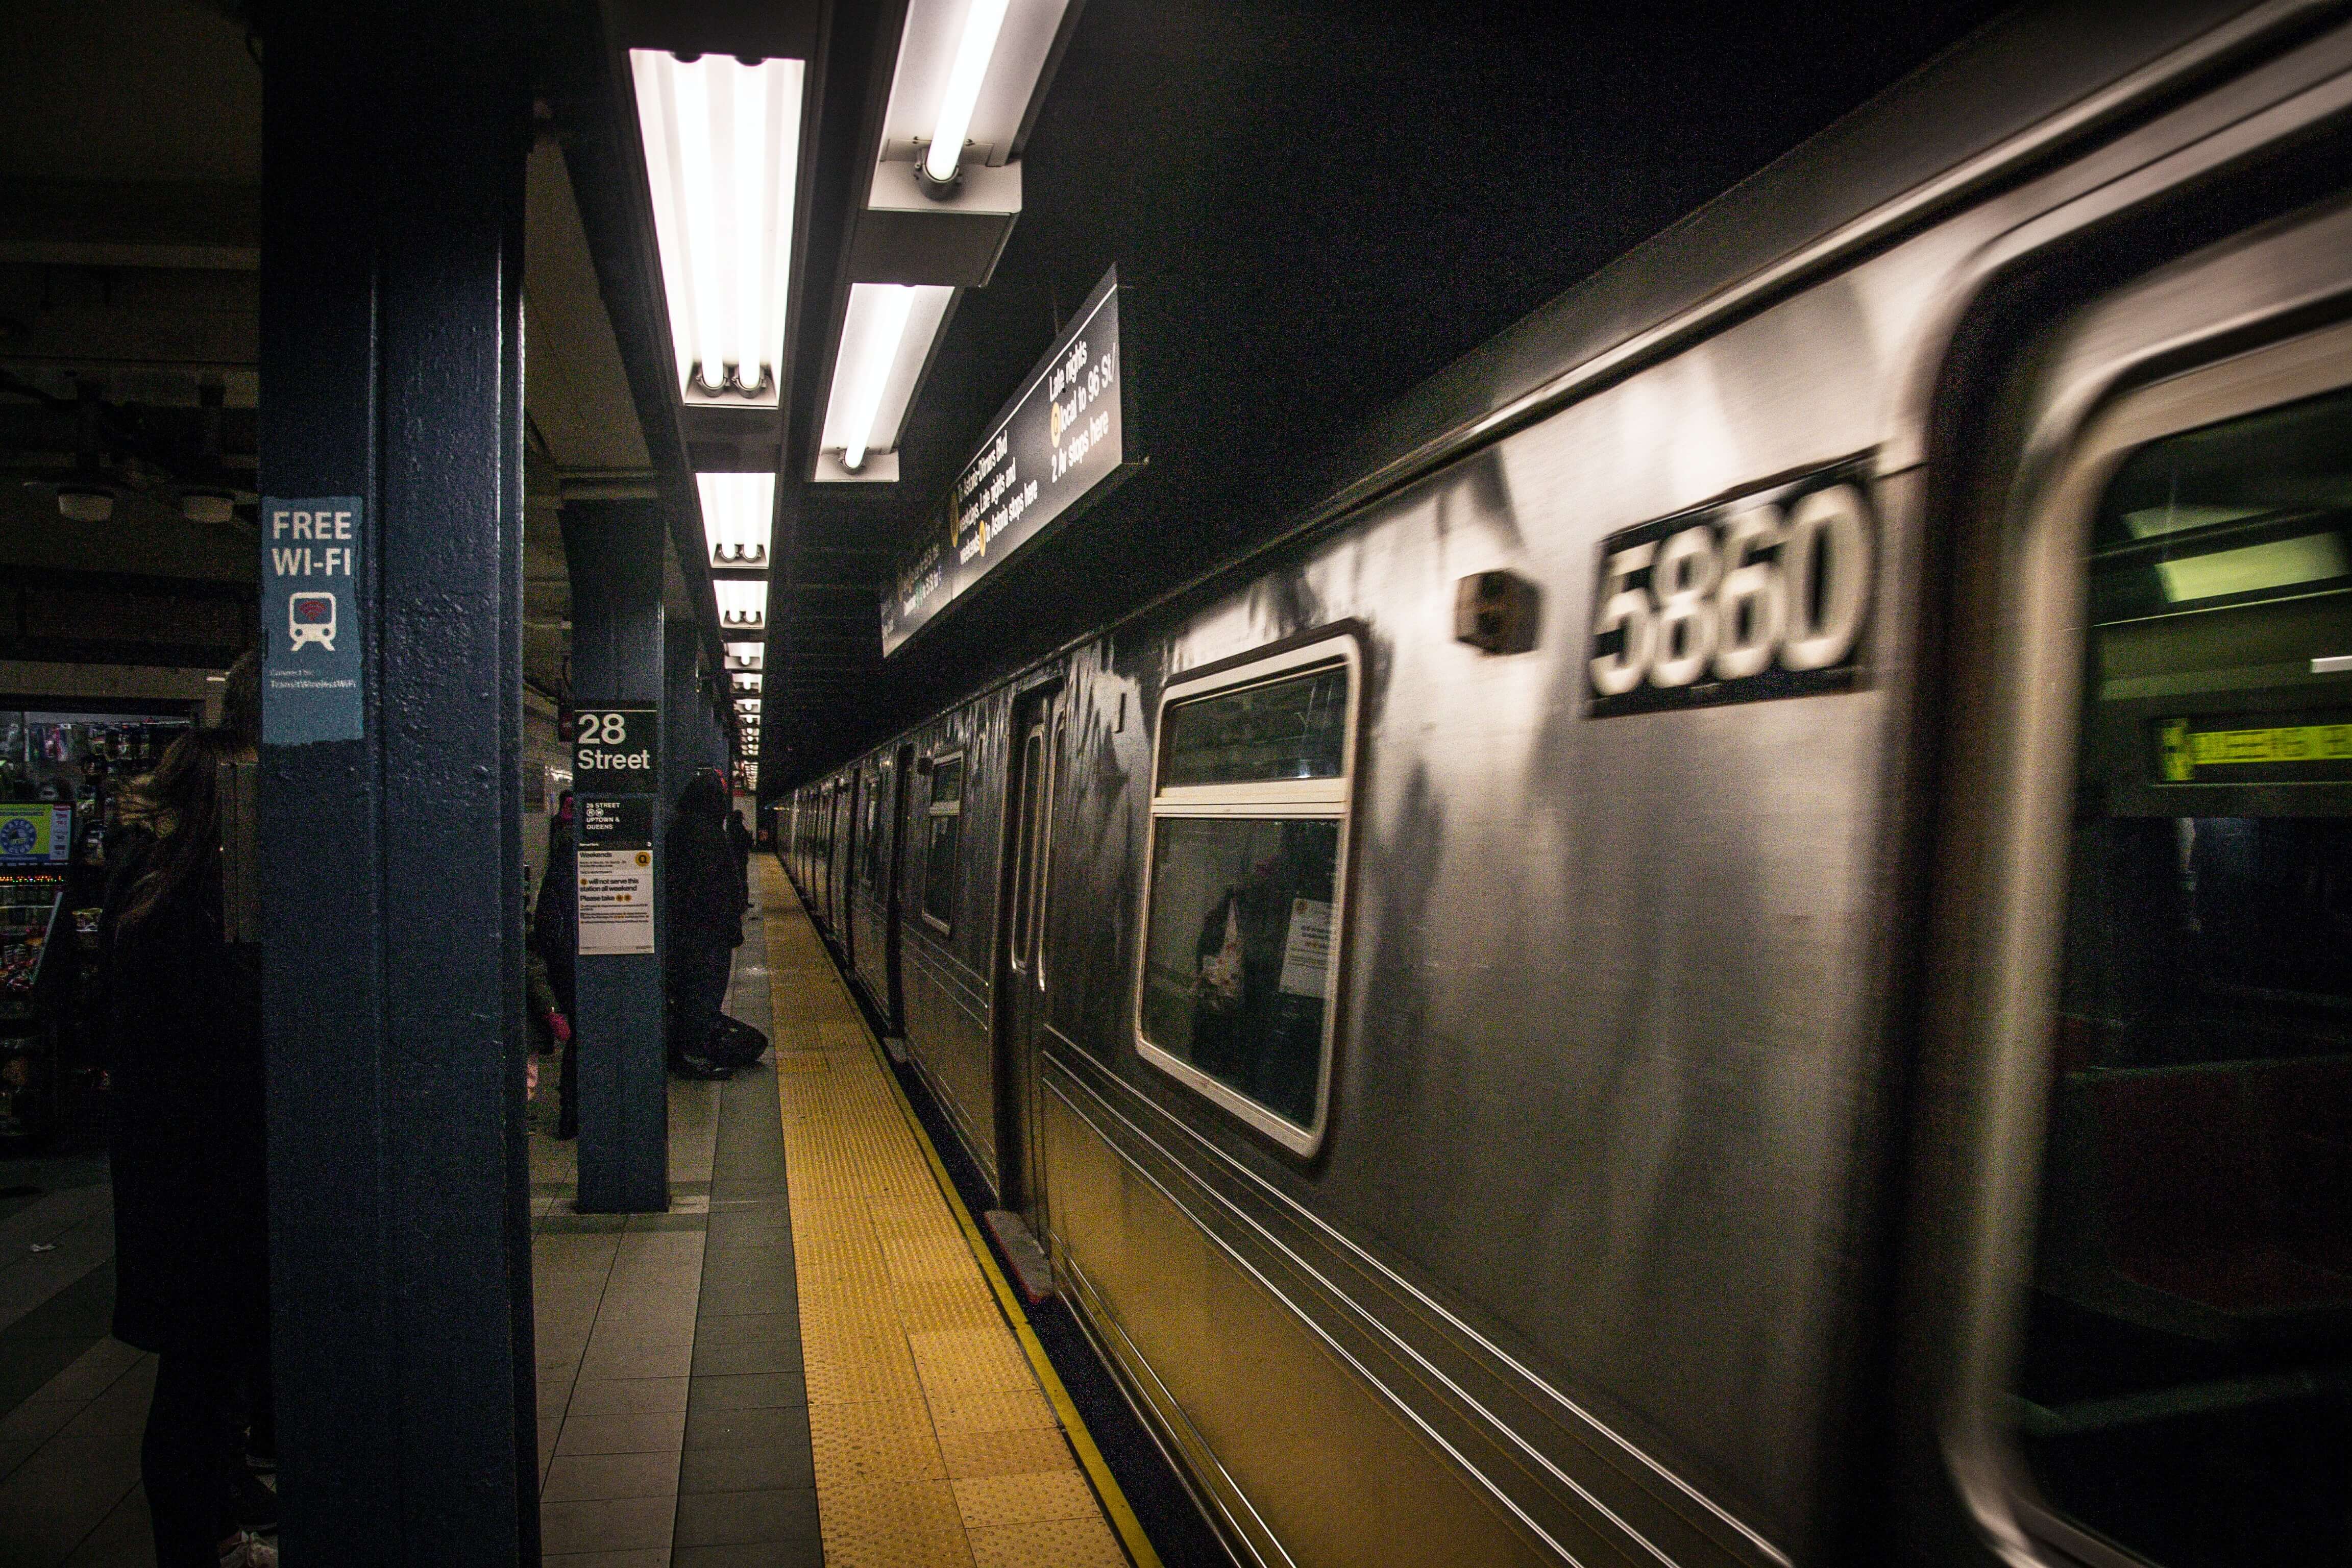 The NYC Subway. Navigating the subway and public transportation in NYC can be stressful. Work with a Therapist in NYC to help develop healthy coping skills.